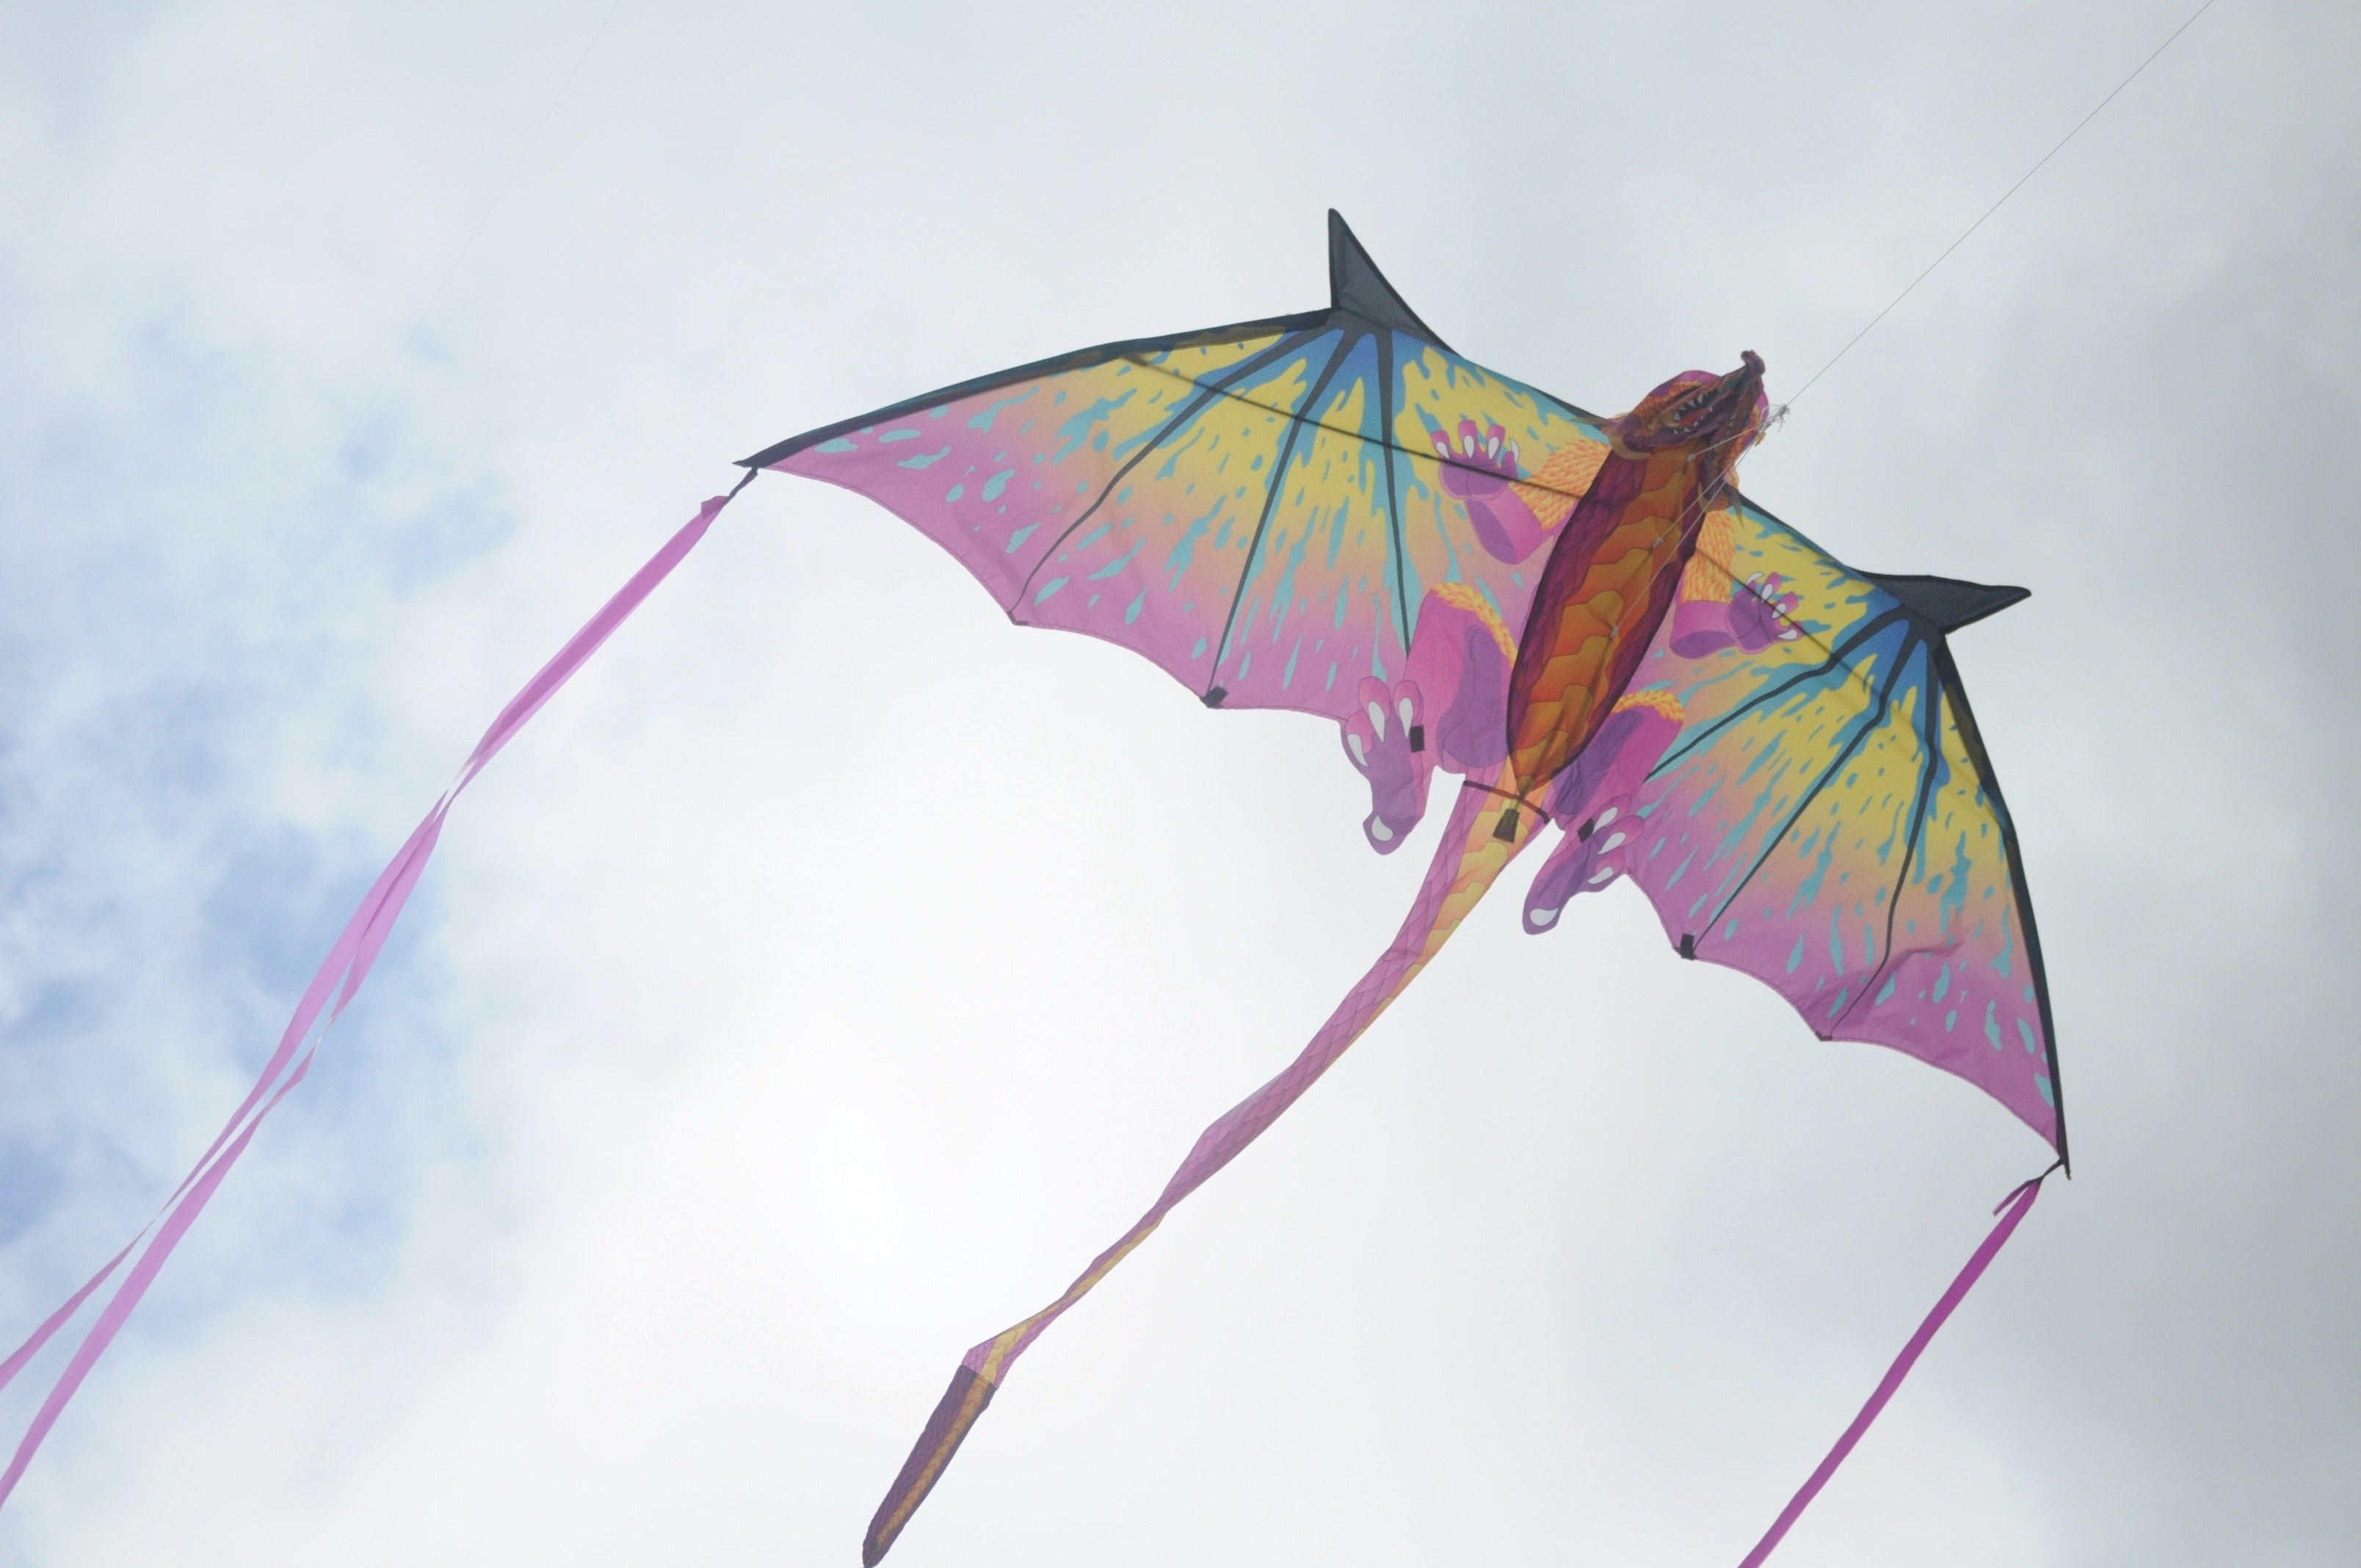 Kite Flying: Dragon kite with a tail, Single line, A popular pastime all over the world. 3220x2140 HD Wallpaper.